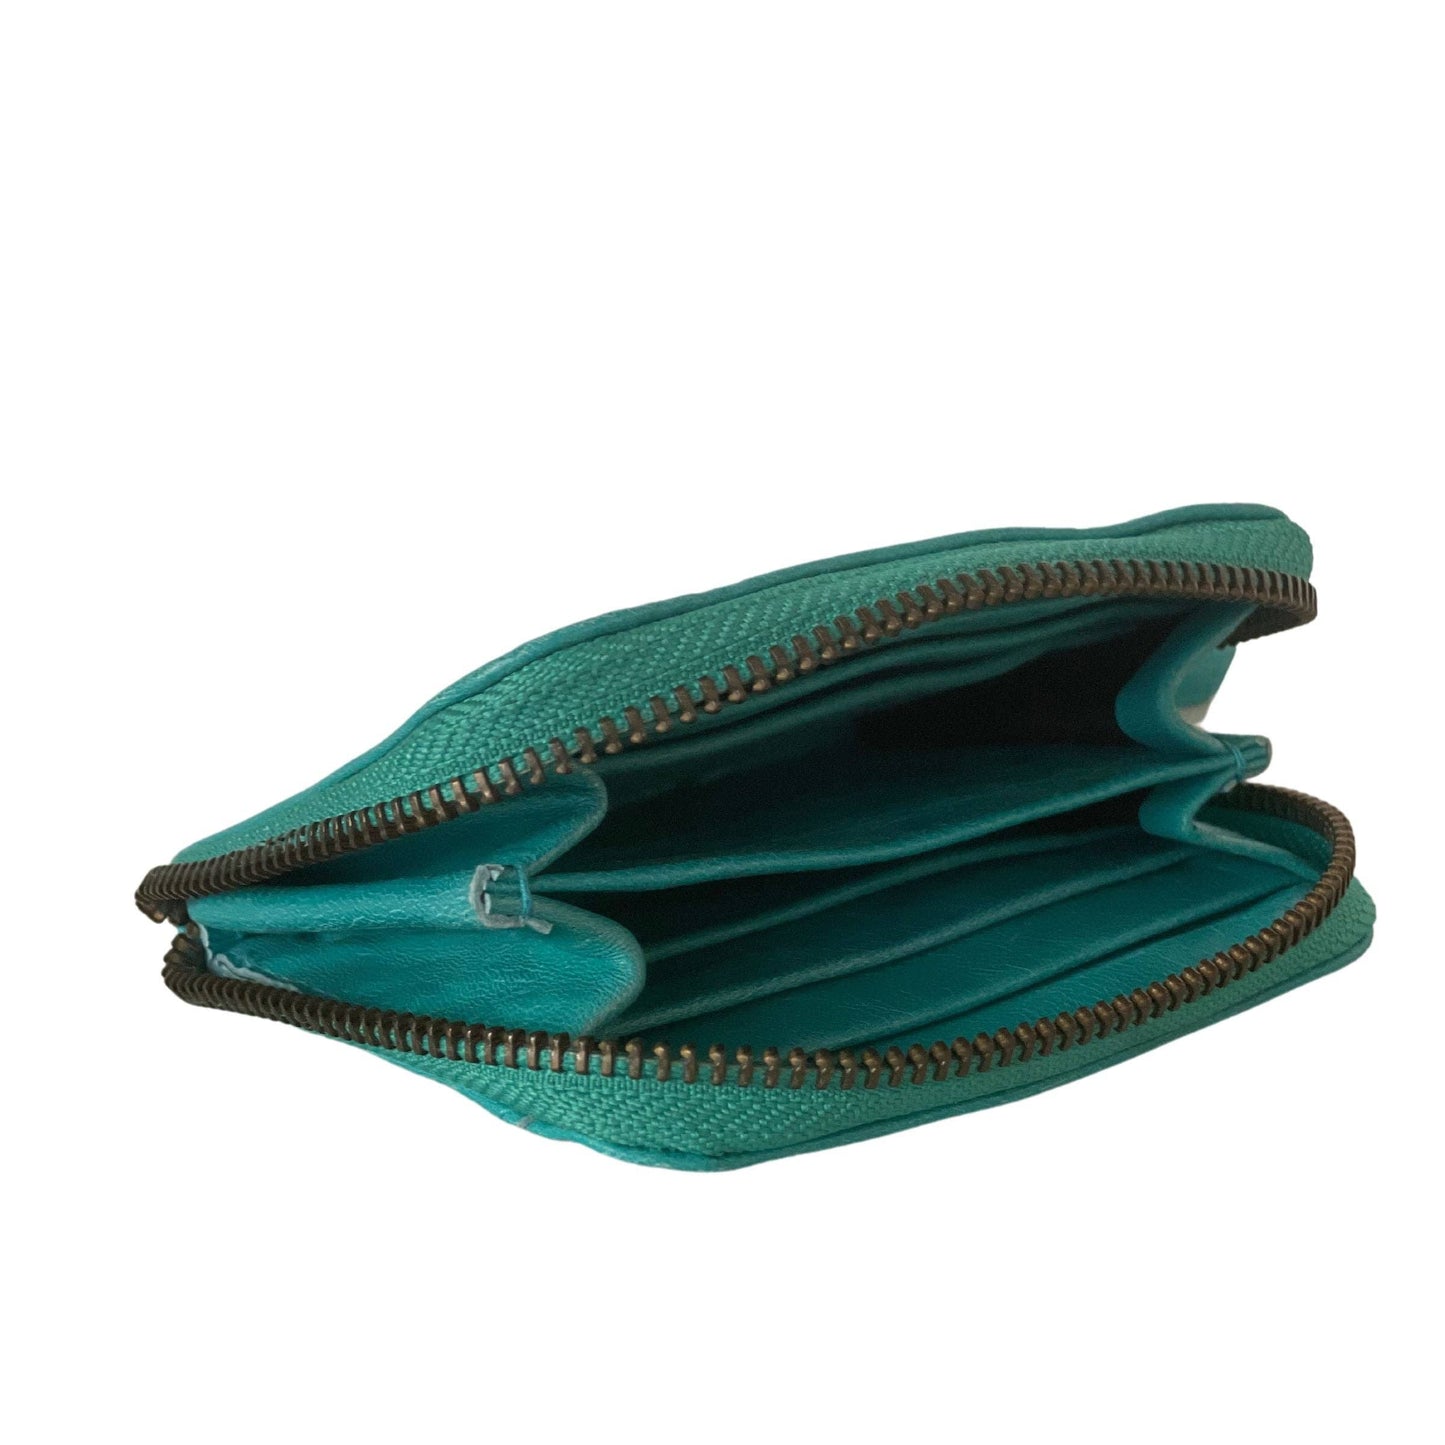 Empire of Bees - Claire Card Leather Wallet - Teal